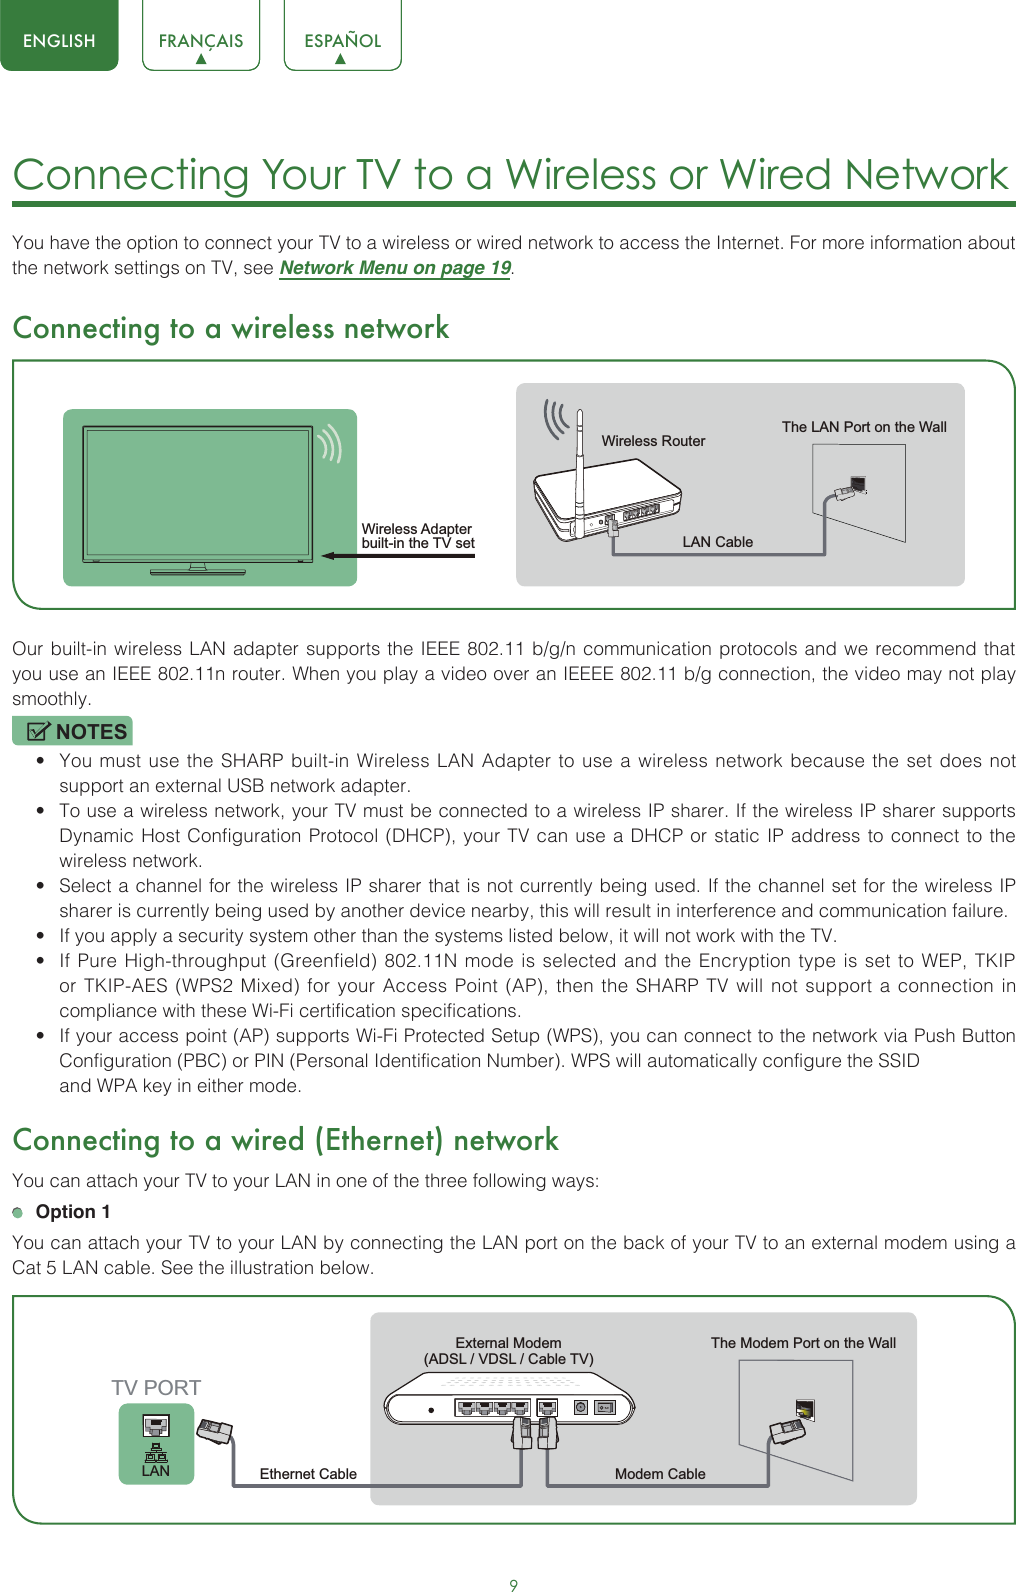 9ENGLISH FRANÇAIS ESPAÑOLENGLISHConnecting Your TV to a Wireless or Wired Network You have the option to connect your TV to a wireless or wired network to access the Internet. For more information about the network settings on TV, see Network Menu on page 19.Connecting to a wireless network Our built-in wireless LAN adapter supports the IEEE 802.11 b/g/n communication protocols and we recommend that you use an IEEE 802.11n router. When you play a video over an IEEEE 802.11 b/g connection, the video may not play smoothly.NOTES• You must use the SHARP built-in Wireless LAN Adapter to use a wireless network because the set does not support an external USB network adapter.• To use a wireless network, your TV must be connected to a wireless IP sharer. If the wireless IP sharer supports Dynamic Host Configuration Protocol (DHCP), your TV can use a DHCP or static IP address to connect to the wireless network.• Select a channel for the wireless IP sharer that is not currently being used. If the channel set for the wireless IP sharer is currently being used by another device nearby, this will result in interference and communication failure.• If you apply a security system other than the systems listed below, it will not work with the TV.• If Pure High-throughput (Greenfield) 802.11N mode is selected and the Encryption type is set to WEP, TKIP or TKIP-AES (WPS2 Mixed) for your Access Point (AP), then the SHARP TV will not support a connection in compliance with these Wi-Fi certification specifications.• Ifyouraccesspoint(AP)supportsWi-FiProtectedSetup(WPS),youcanconnecttothenetworkviaPushButtonConfiguration (PBC) or PIN (Personal Identification Number). WPS will automatically configure the SSID   and WPA key in either mode.Connecting to a wired (Ethernet) networkYou can attach your TV to your LAN in one of the three following ways: Option 1You can attach your TV to your LAN by connecting the LAN port on the back of your TV to an external modem using a Cat 5 LAN cable. See the illustration below. Wireless Adapterbuilt-in the TV set  LAN CableWireless Router The LAN Port on the WallExternal Modem(ADSL / VDSL / Cable TV)  The Modem Port on the WallEthernet Cable  Modem Cable LANTV PORT